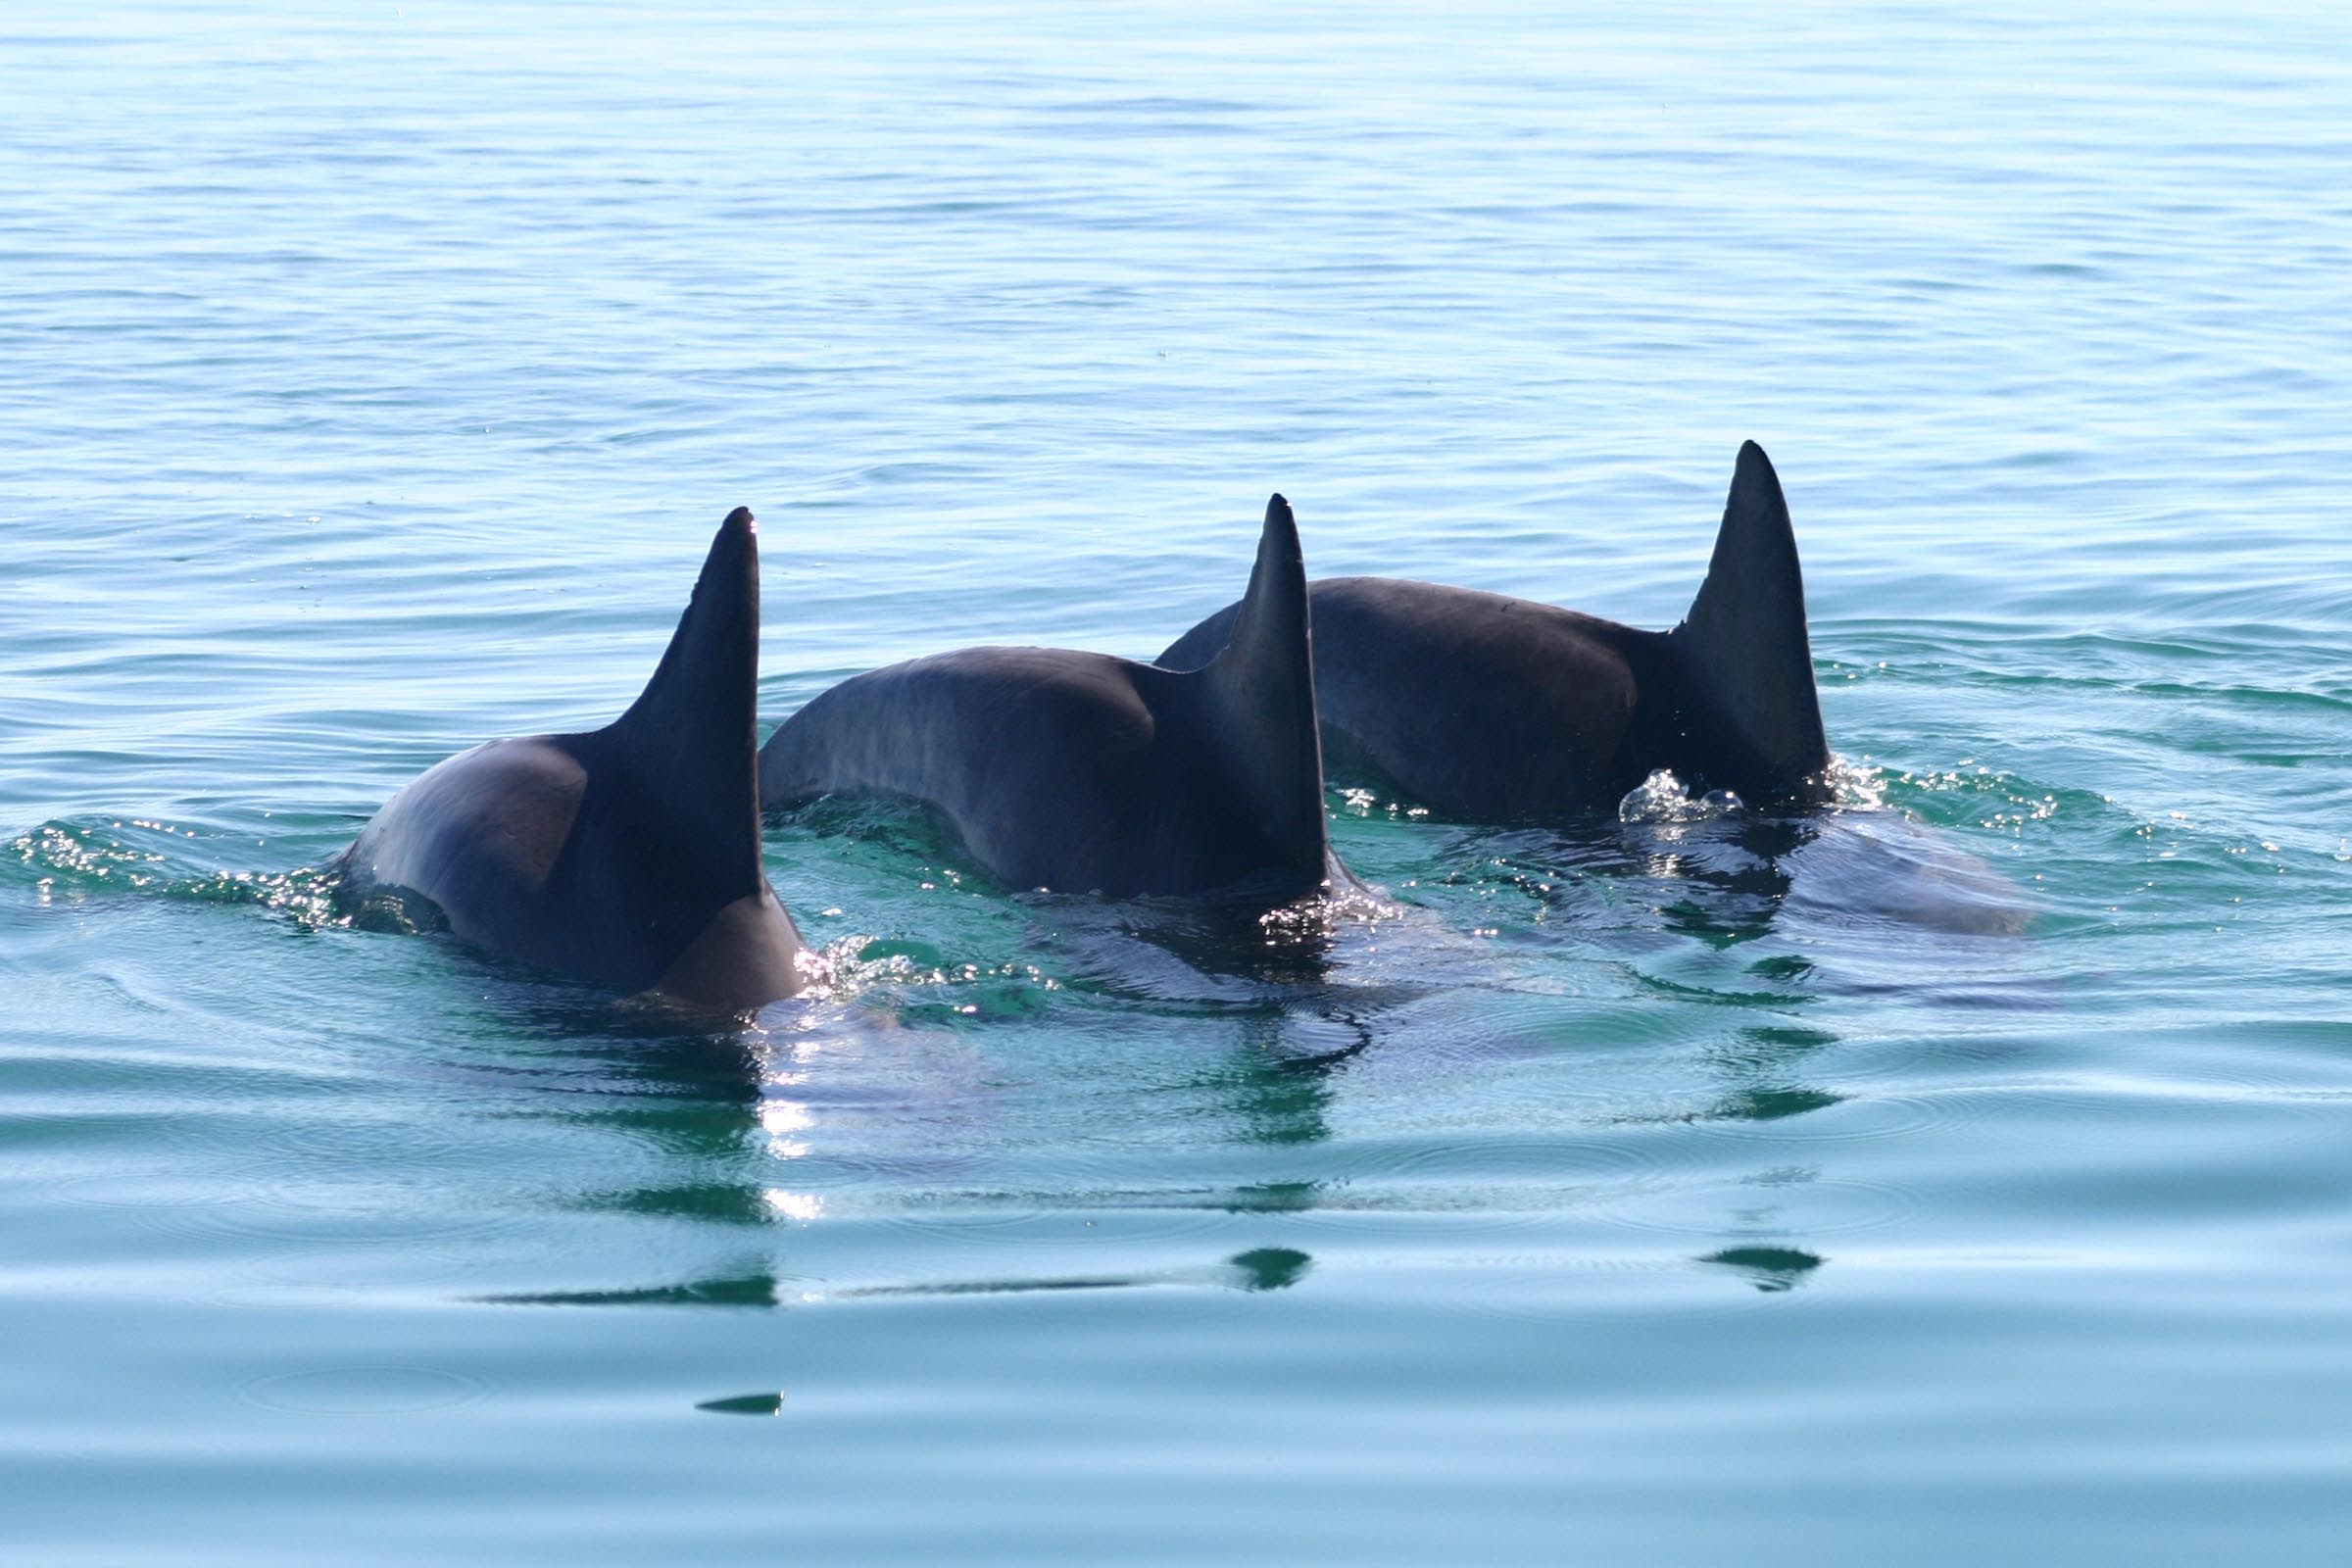 Male bottlenose dolphins form gangs to get a mate